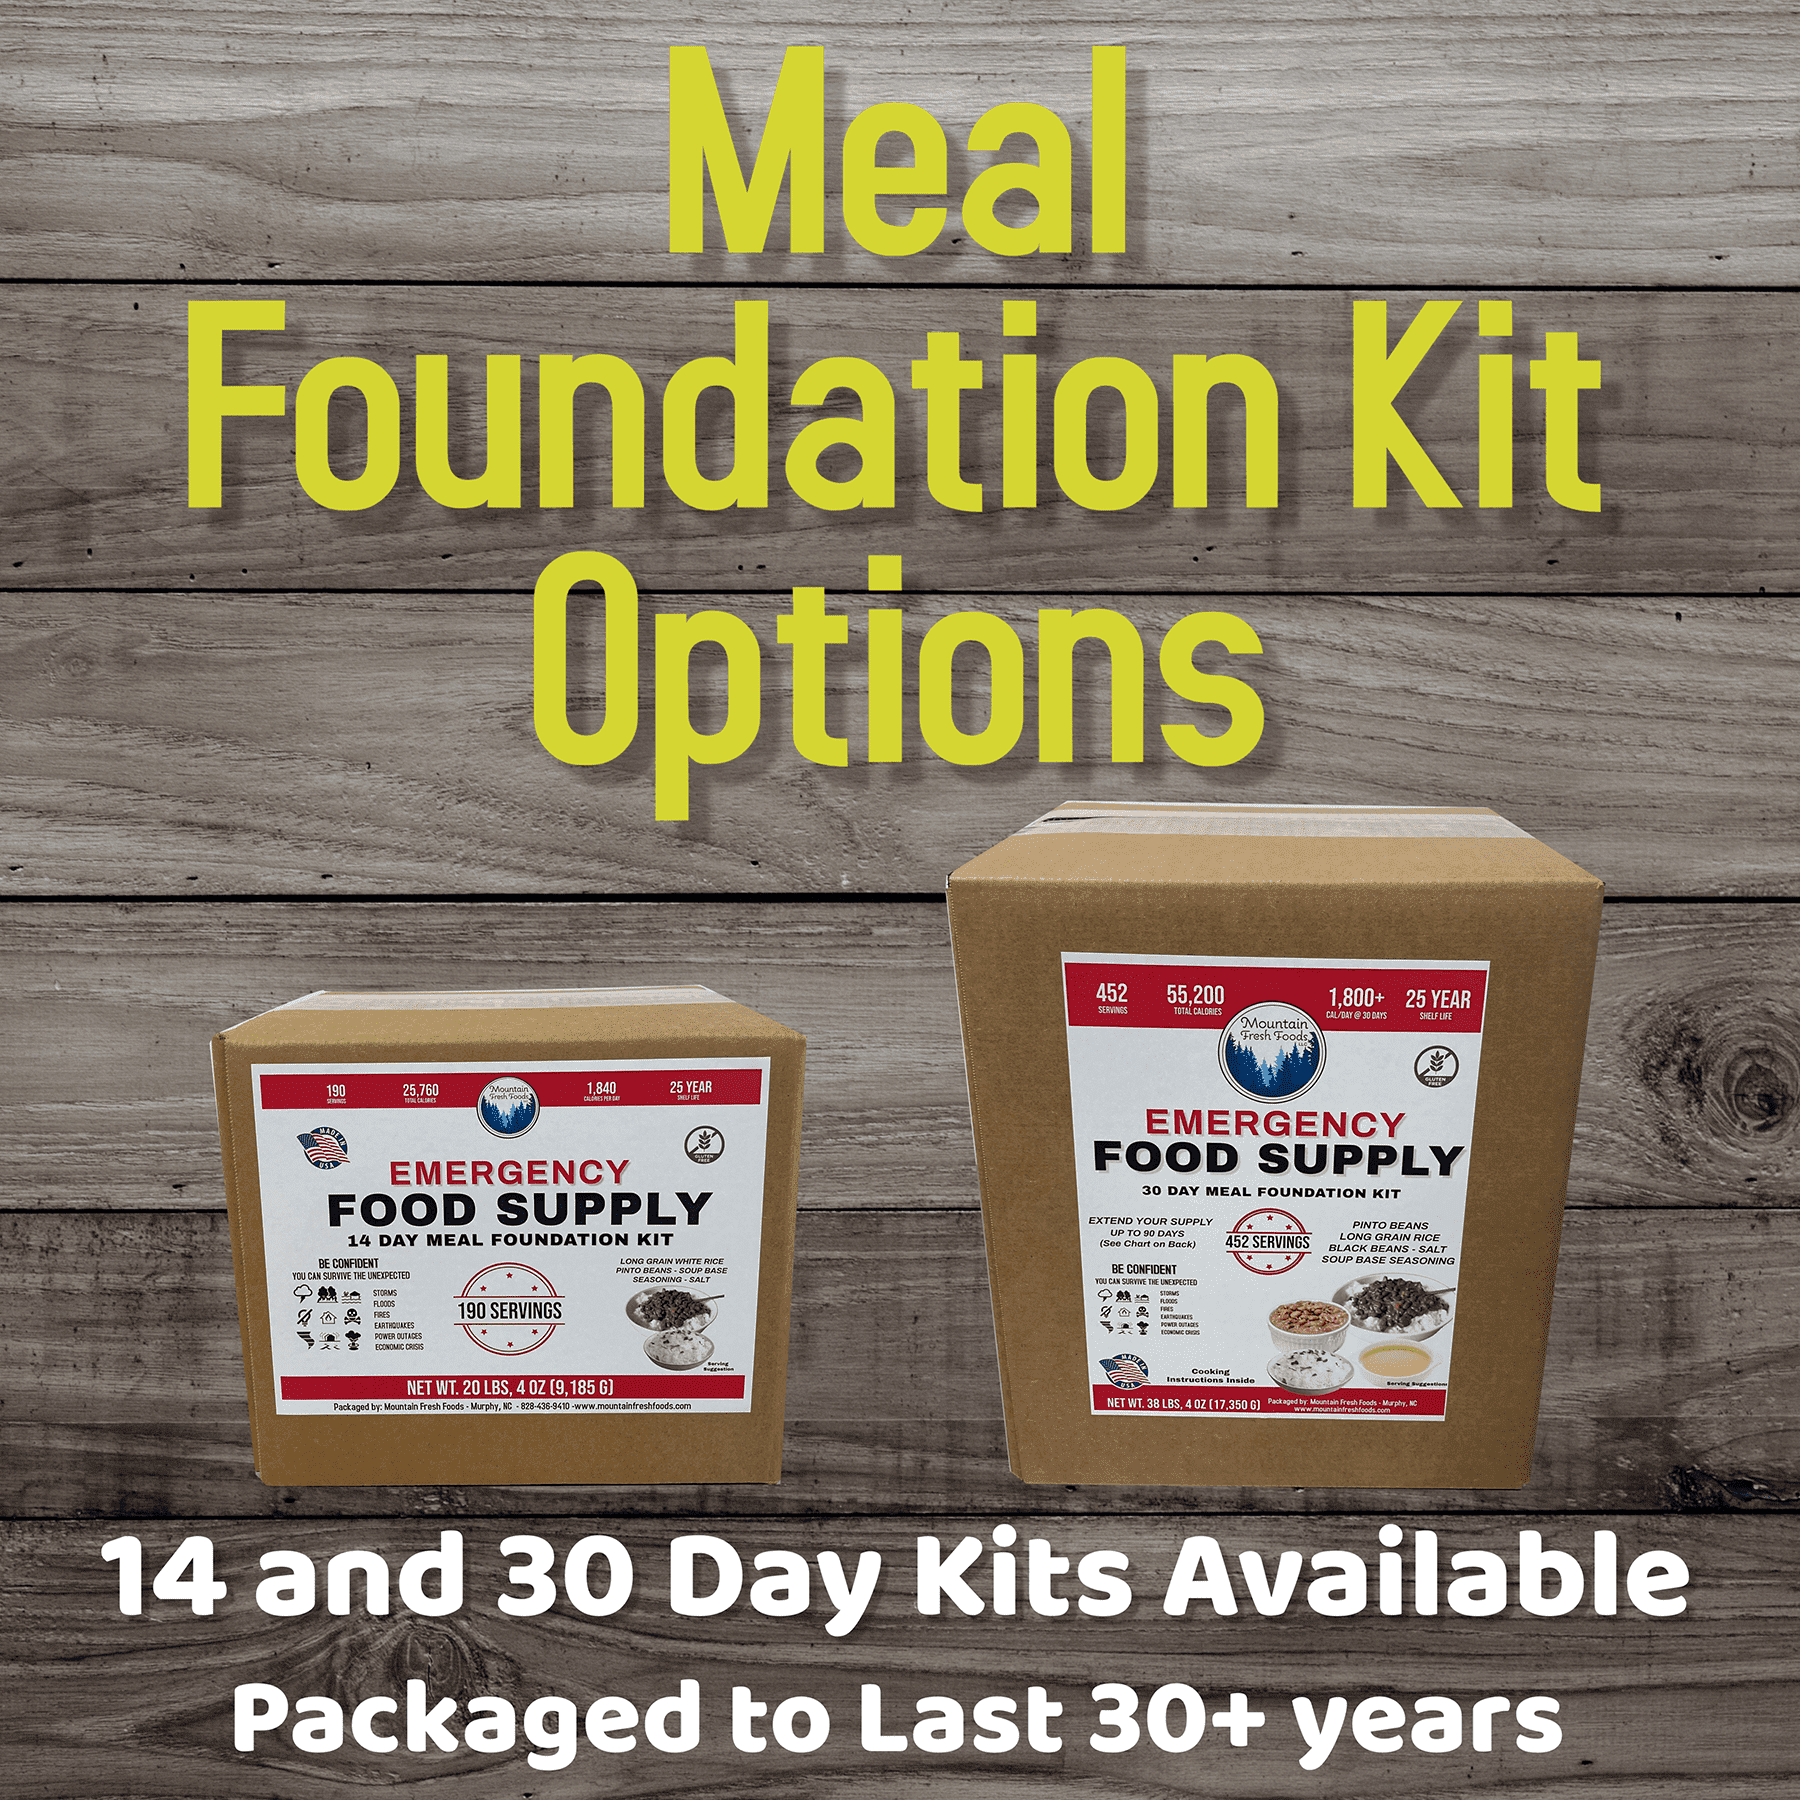 Meal Foundation Kit Options